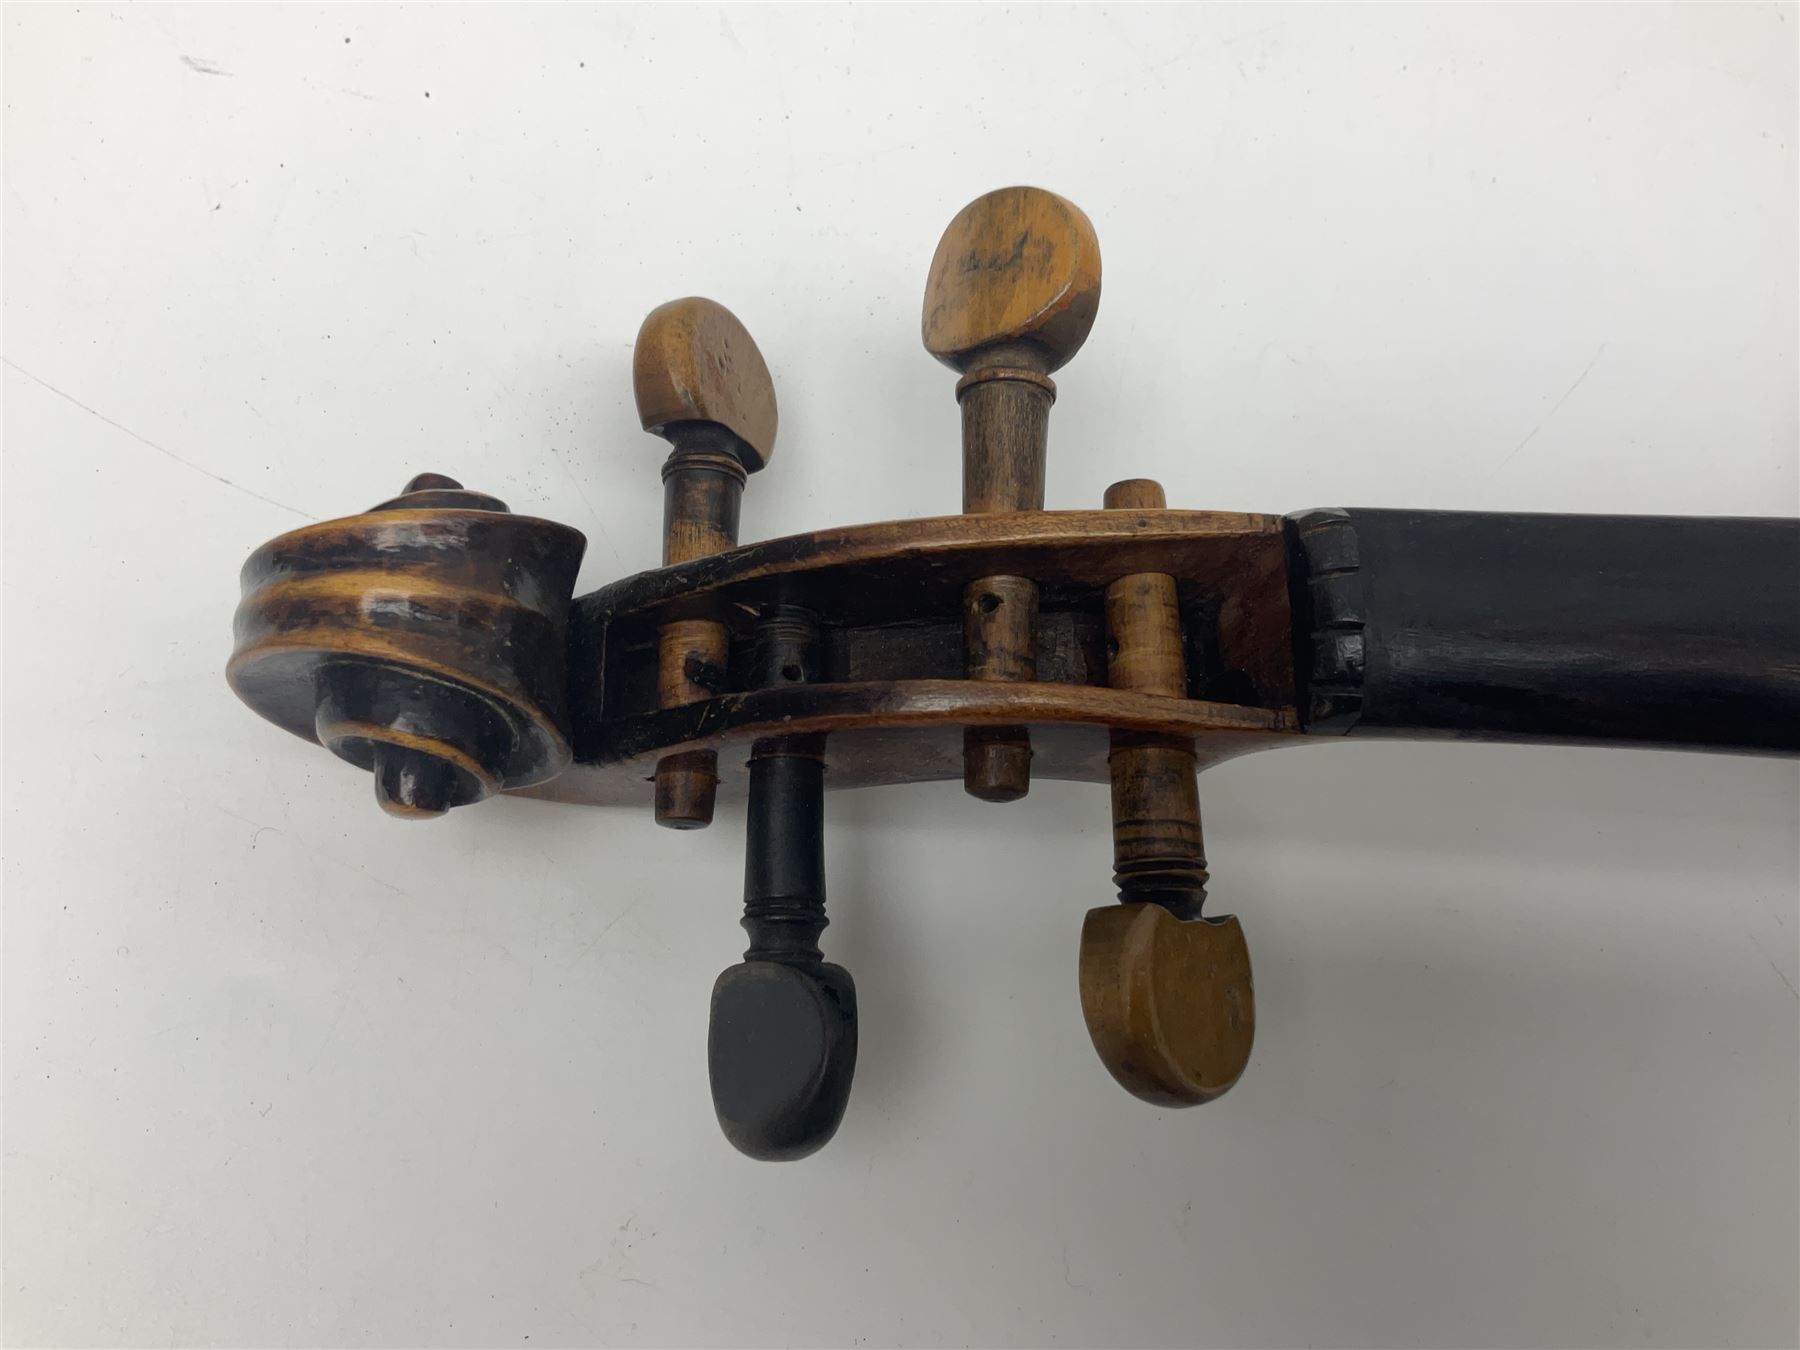 Czechoslovakian violin stamped LIZST c1920 with 35.5cm two-piece maple back and ribs and spruce top - Image 11 of 15